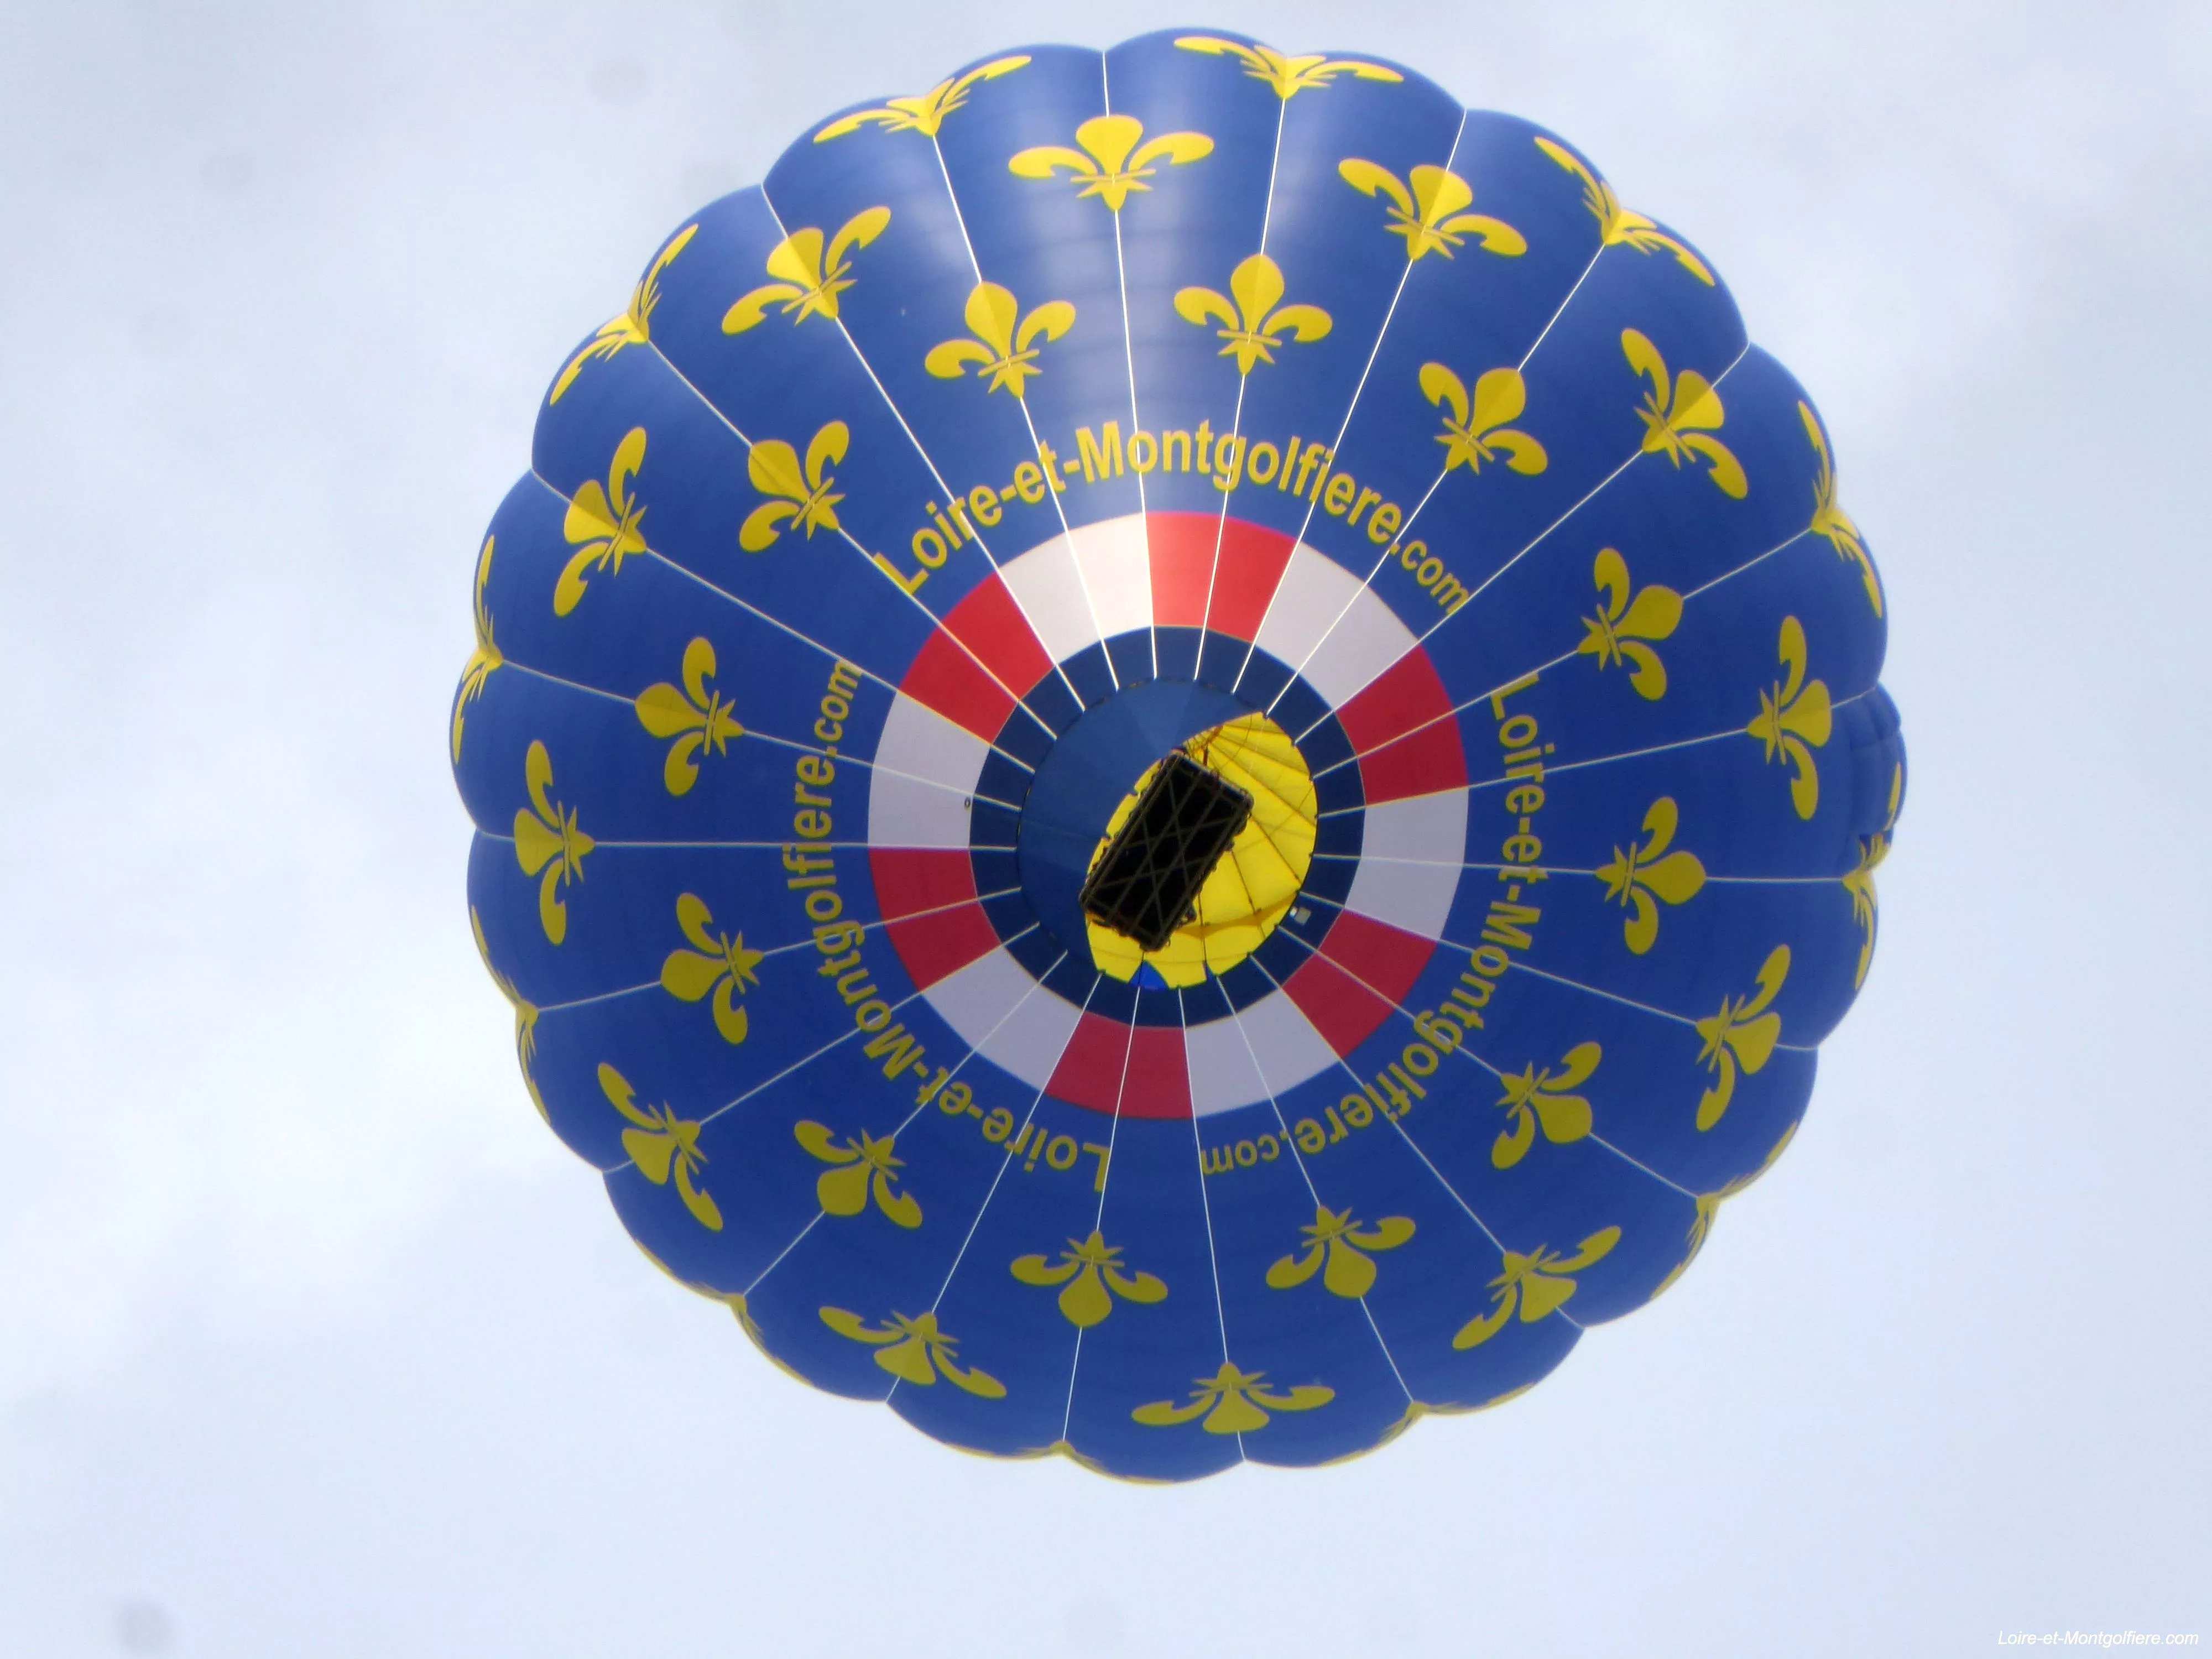 Touraine Ballon in France, Europe | Hot Air Ballooning - Rated 1.2